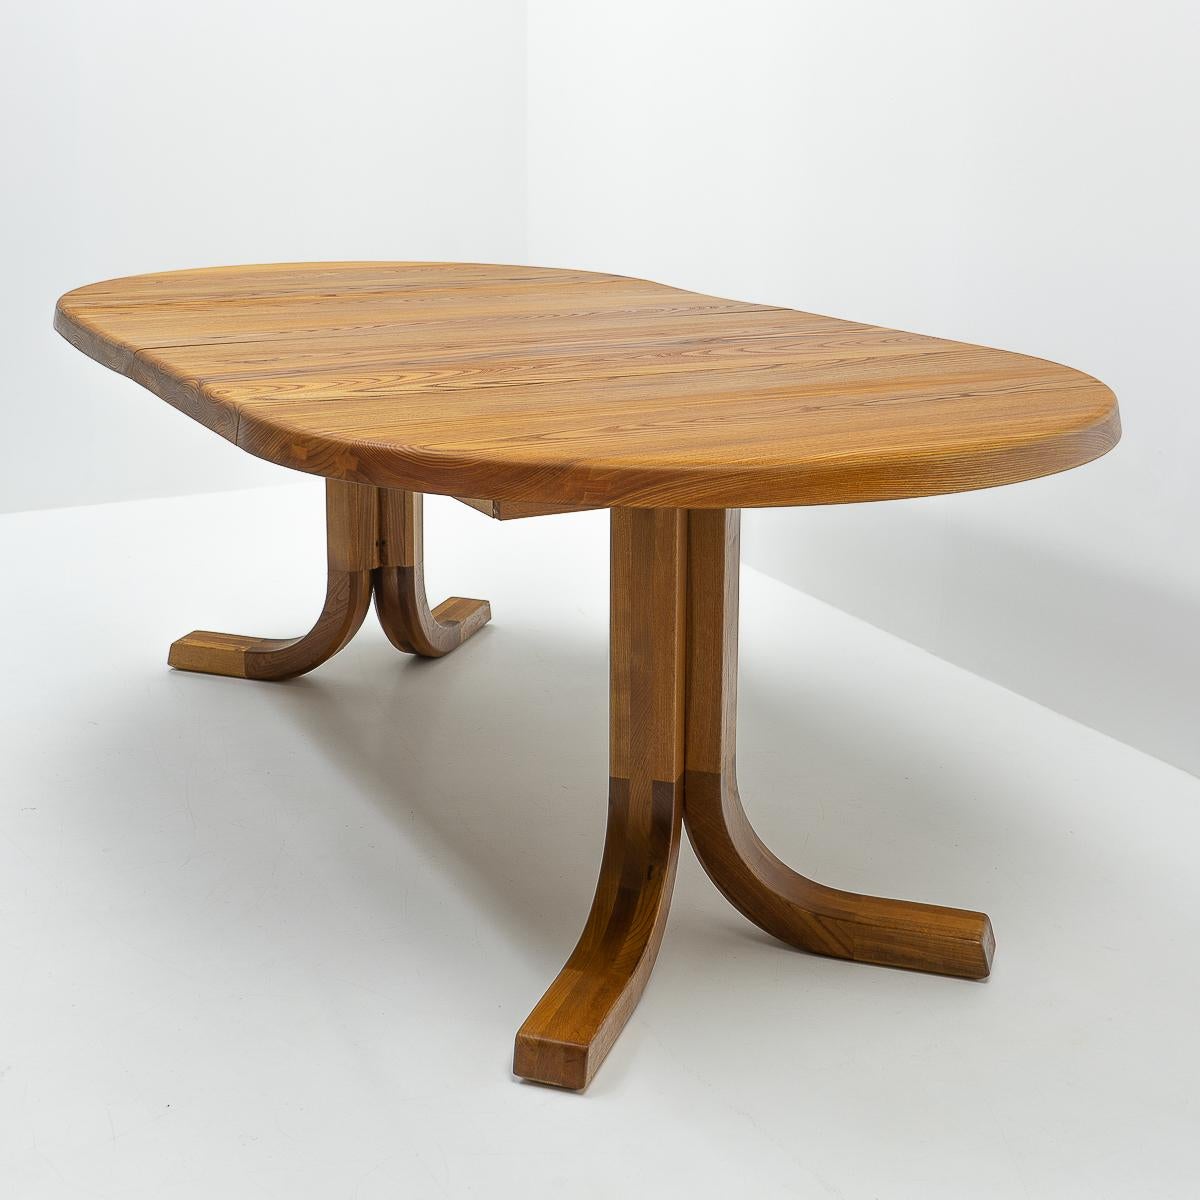 Beautiful round T40 dining table designed by Pierre Chapo. As with all furniture by Chapo, this piece shows excellent craftsmanship, is constructed in solid wood and was made to last.

Made in French Elm, nowadays very difficult to source due to the